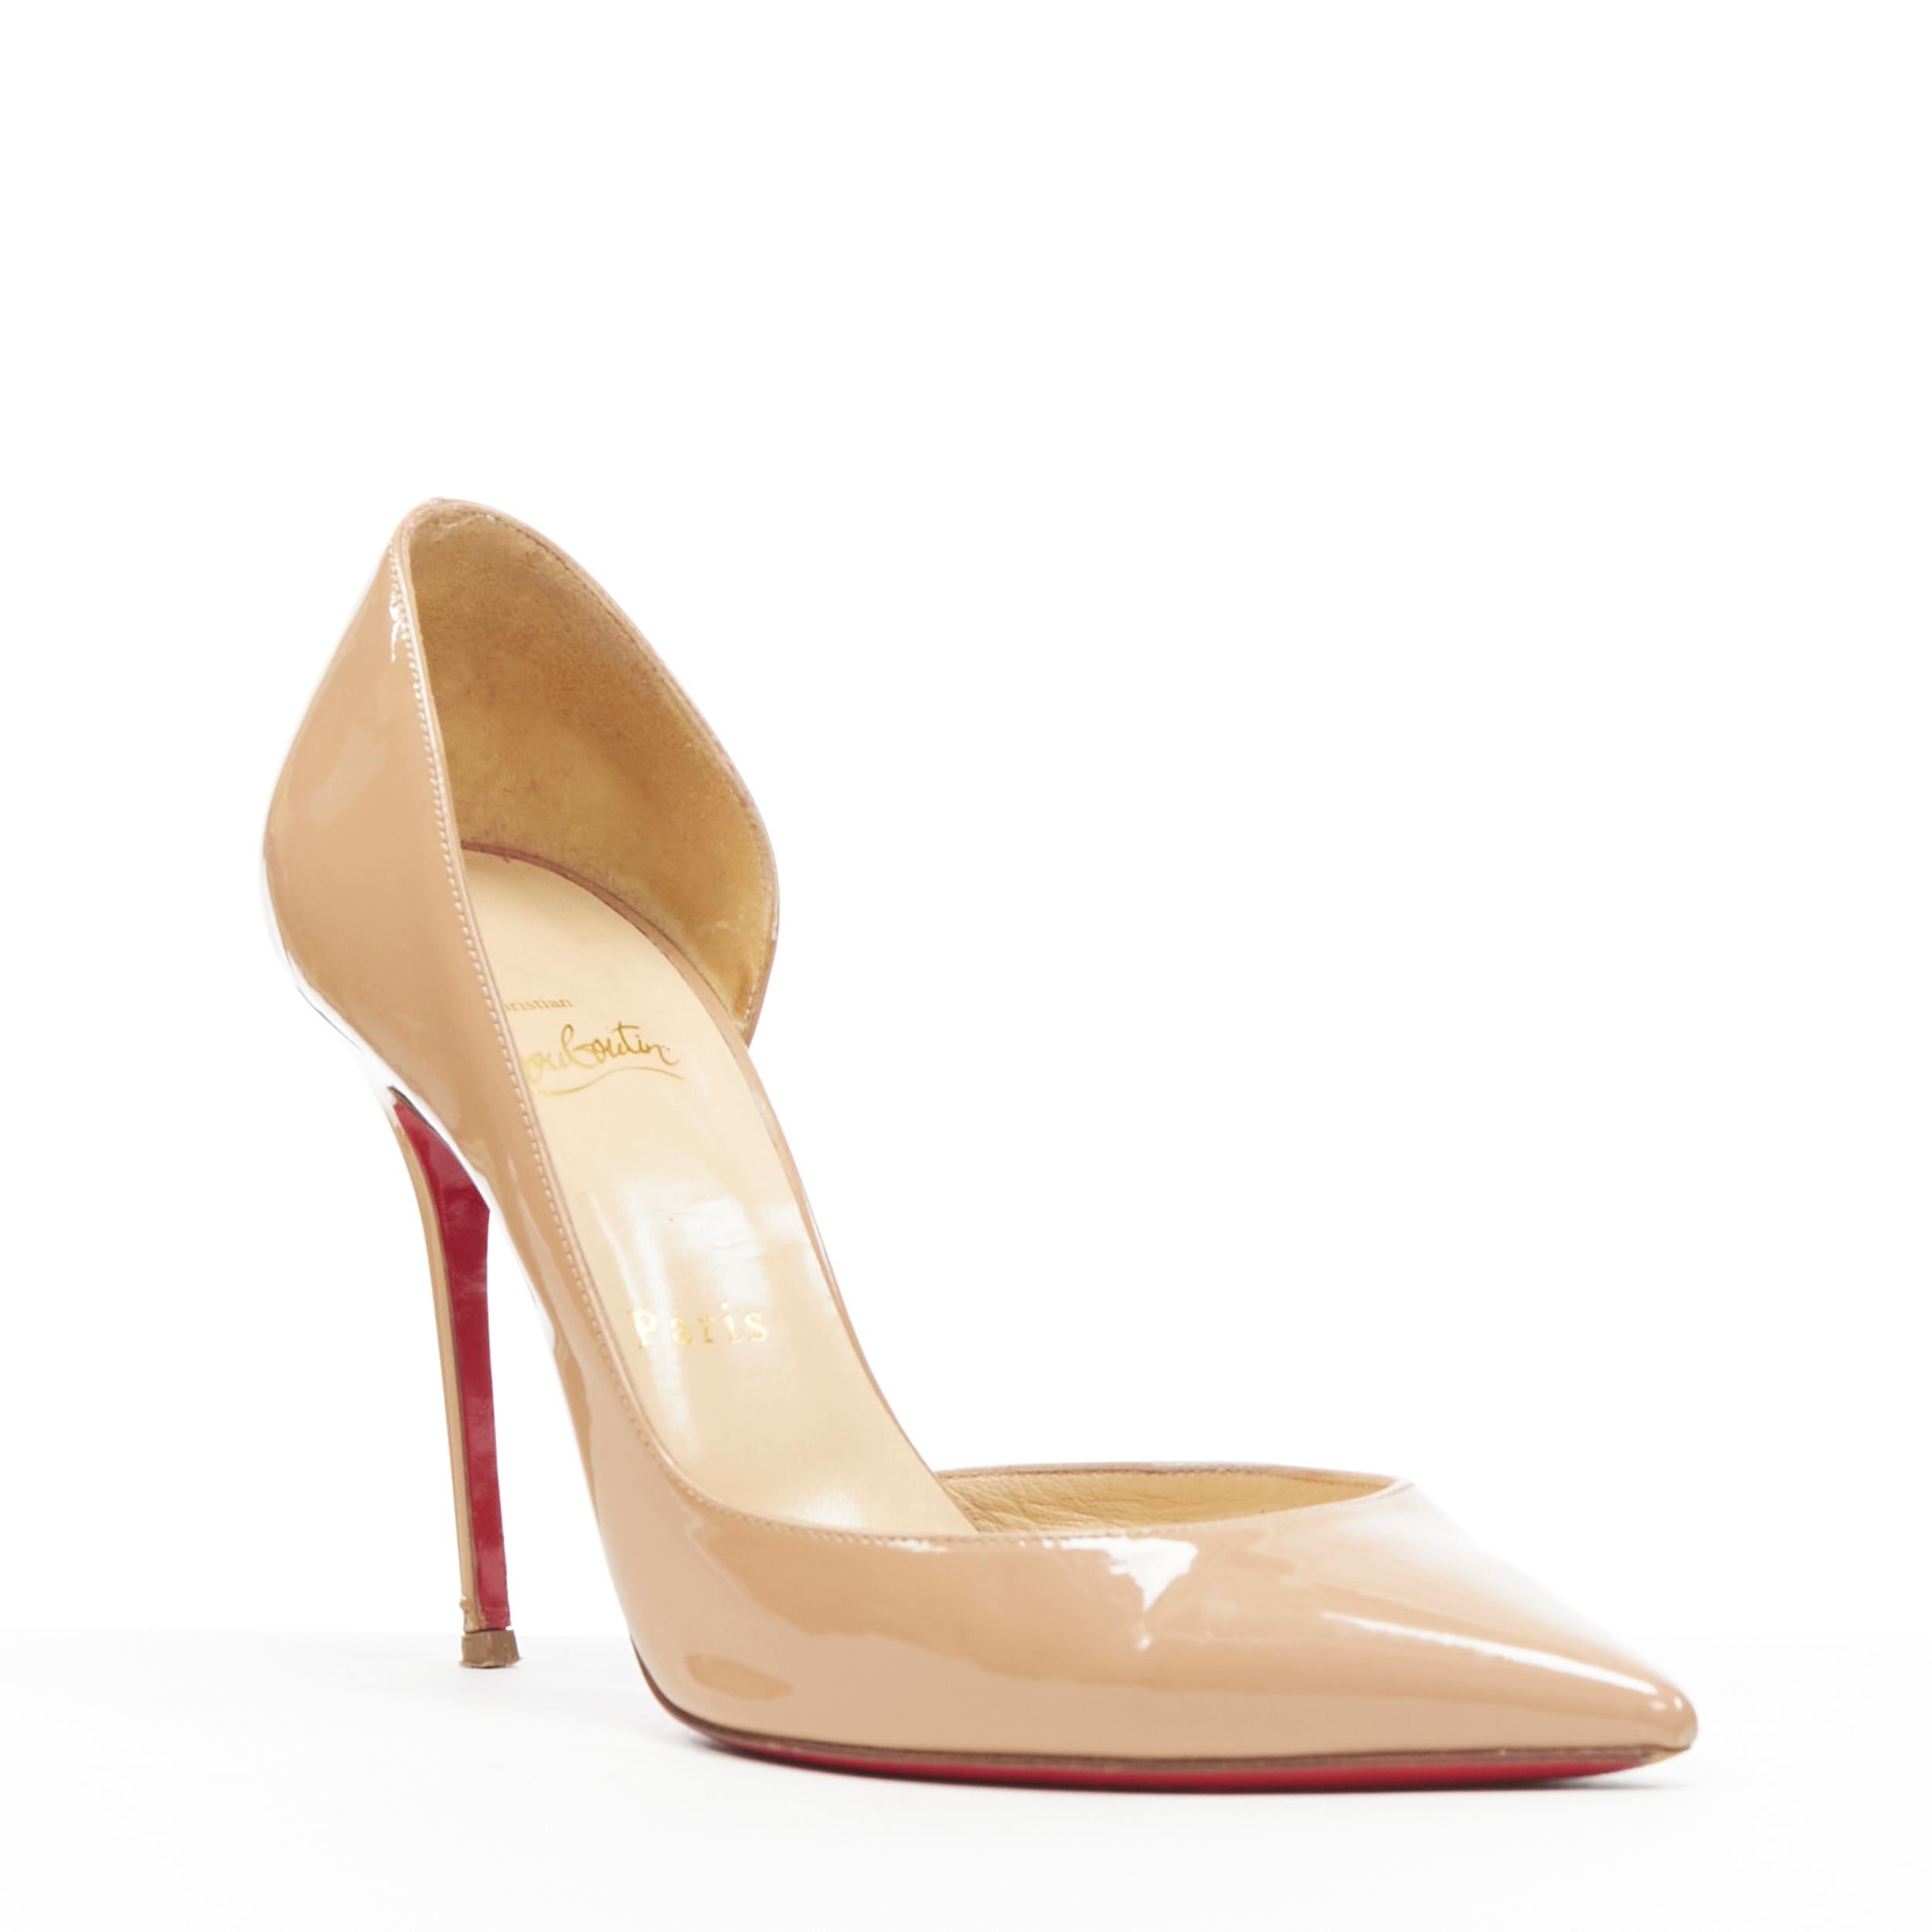 CHRISTIAN LOUBOUTIN Iriza 100 nude patent half dorsay pointy pump EU38 
Reference: TGAS/B00147 
Brand: Christian Louboutin 
Designer: Christian Louboutin 
Model: Iriza 100 
Material: Patent leather 
Color: Beige 
Pattern: Solid 
Extra Detail: Iriza